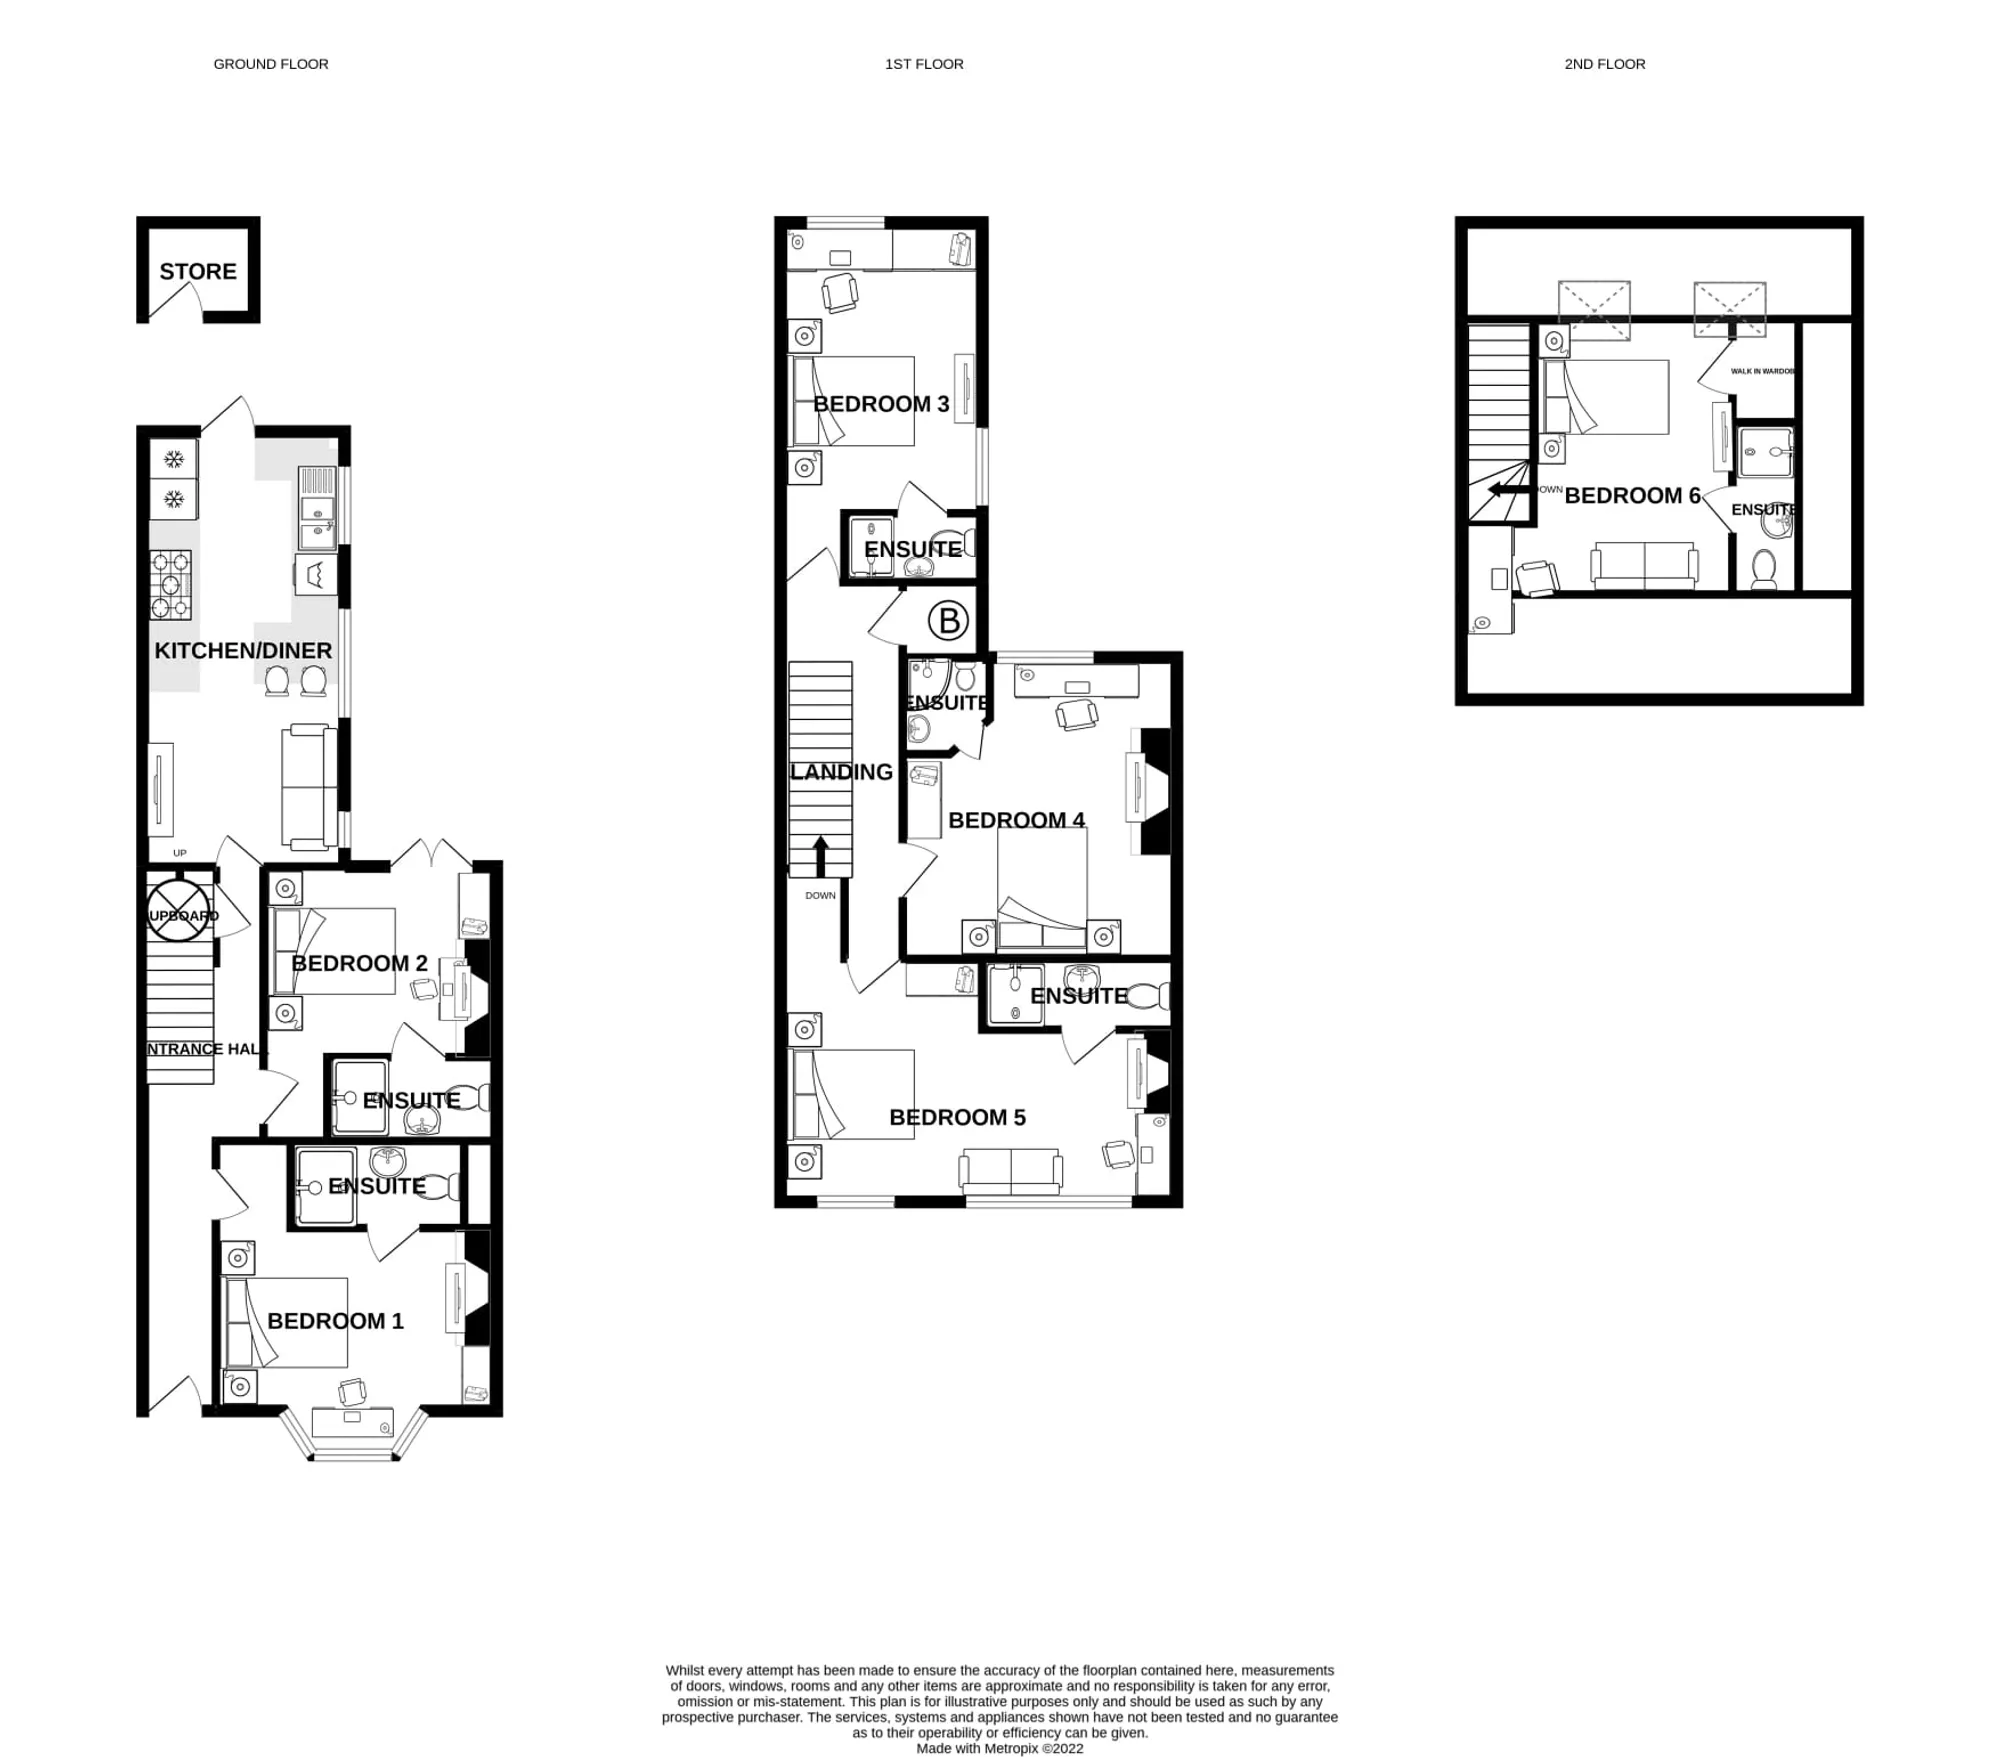 6 bed mid-terraced house to rent in Stretton Road, Leicester - Property floorplan